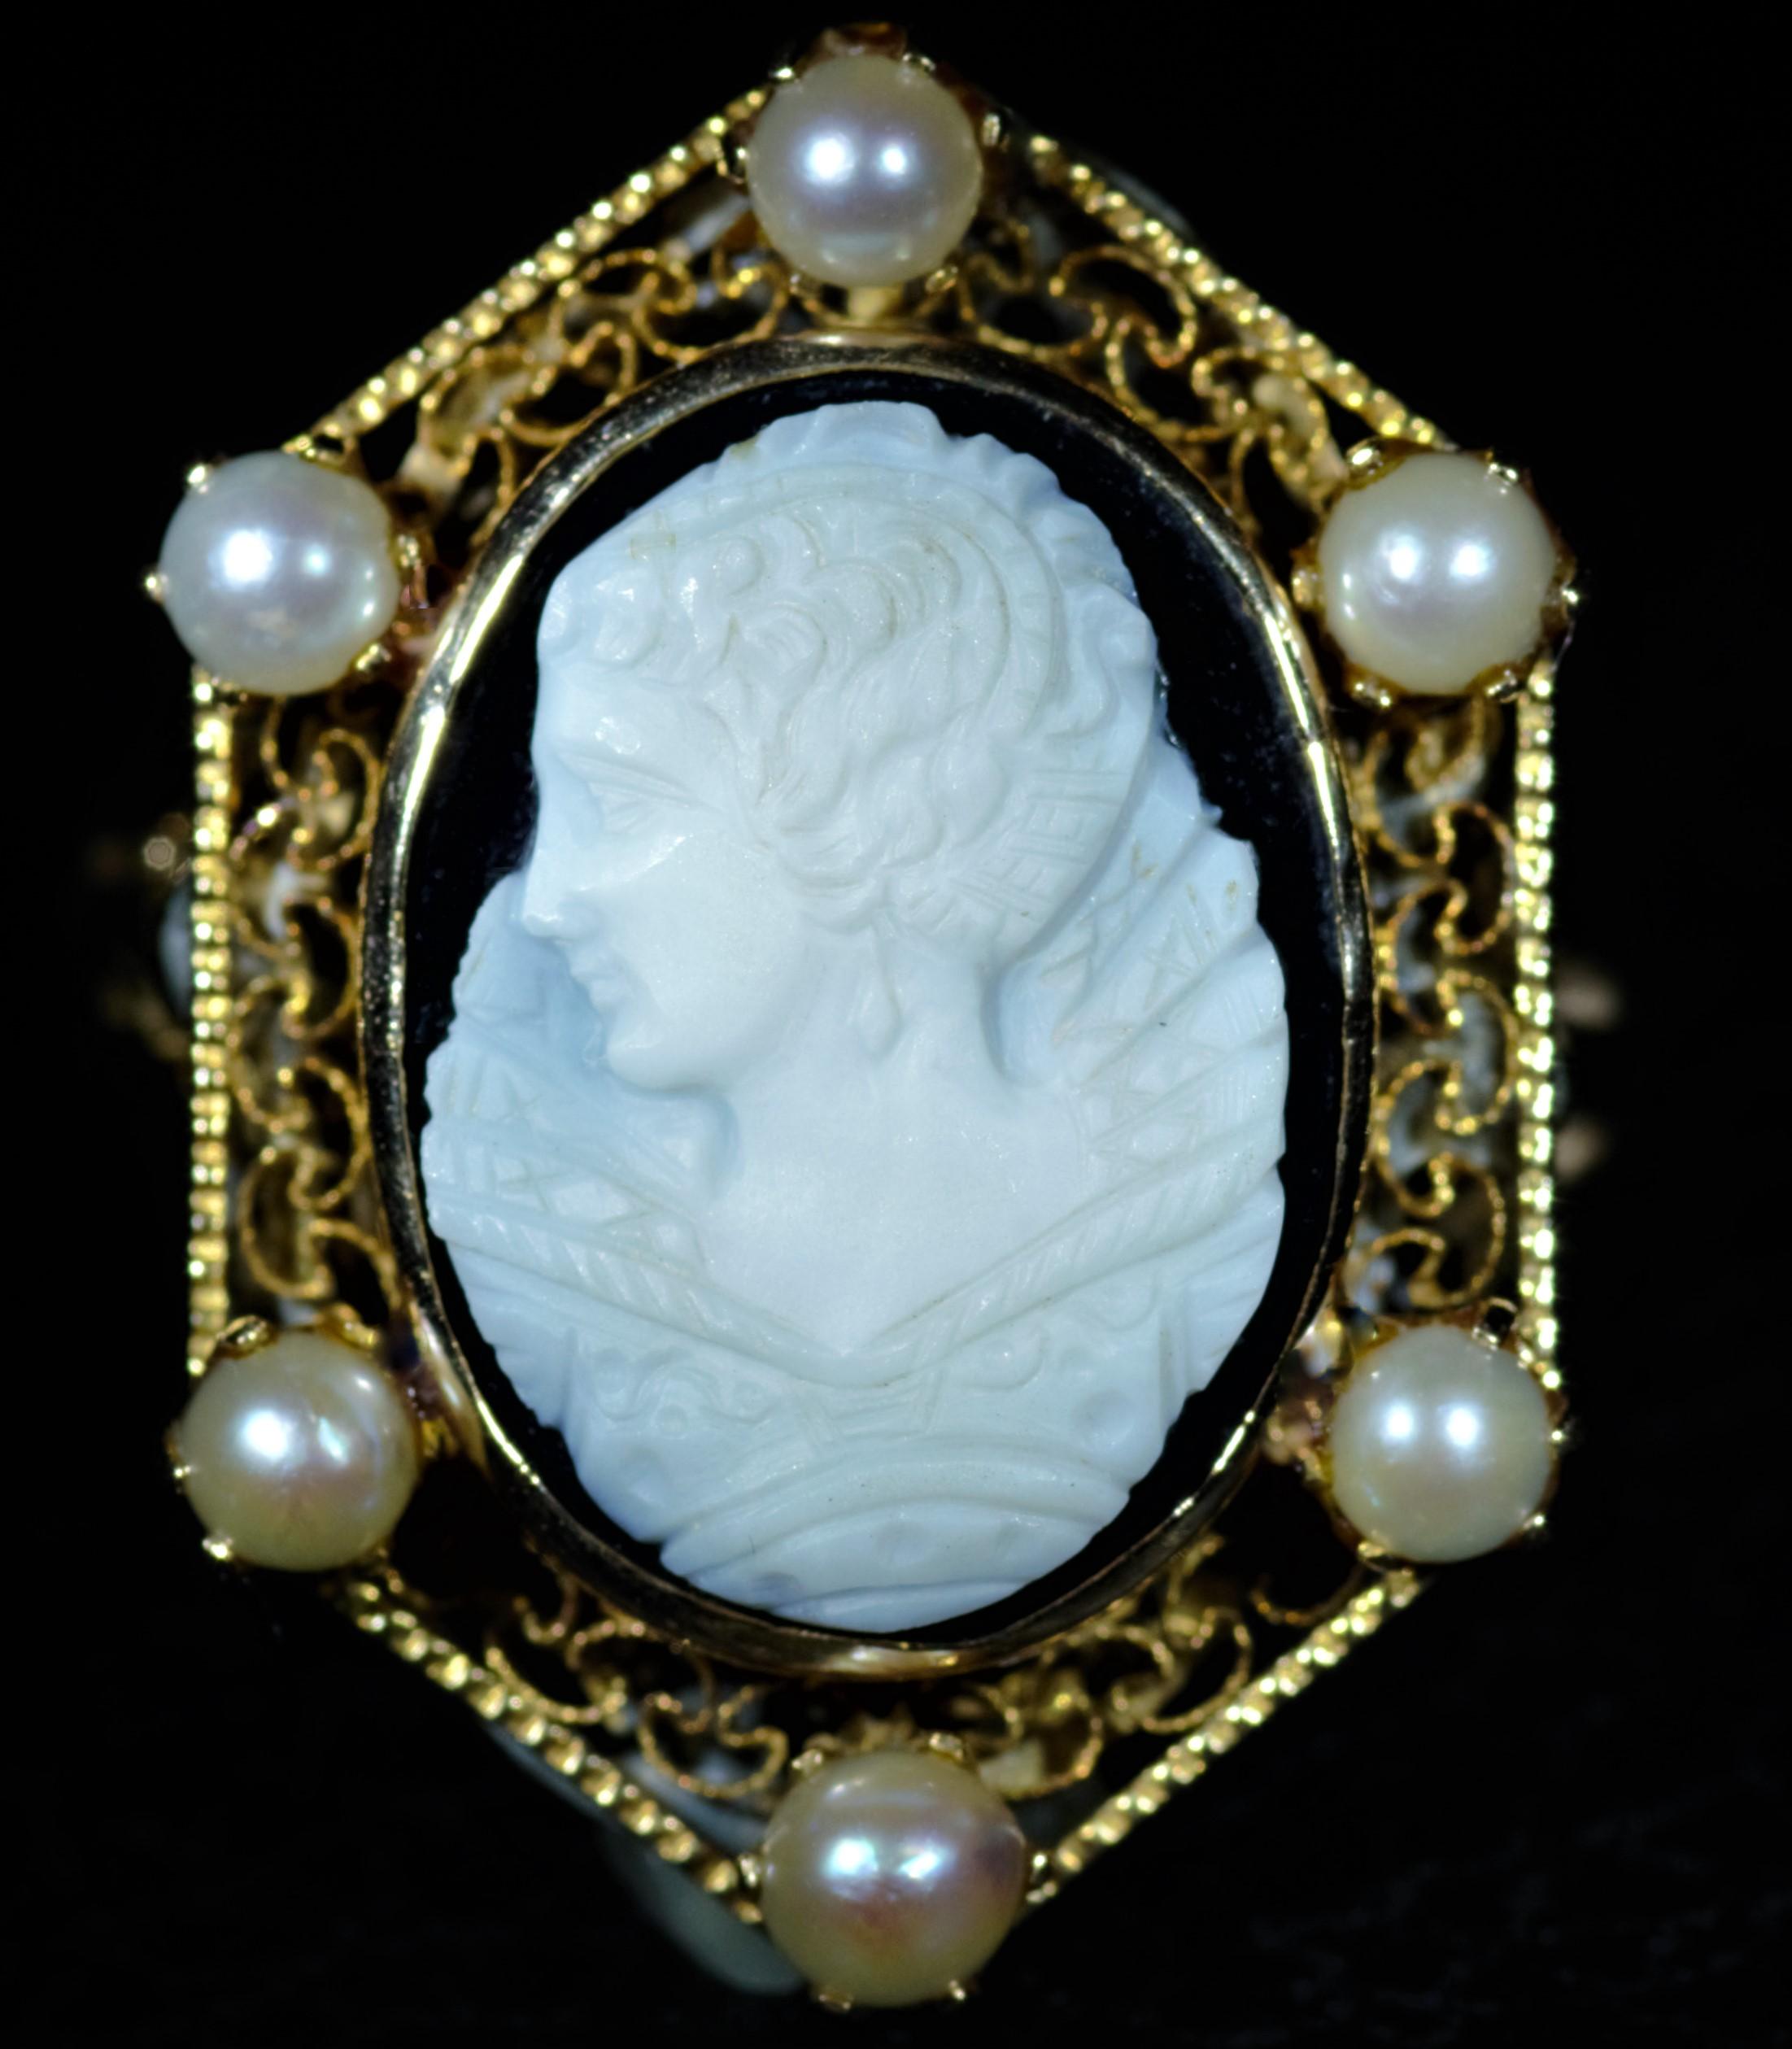 Victorian Filigree Cameo Ring finished with six Pearls surrounding the center hand carved cameo in 14 karat yellow gold.  